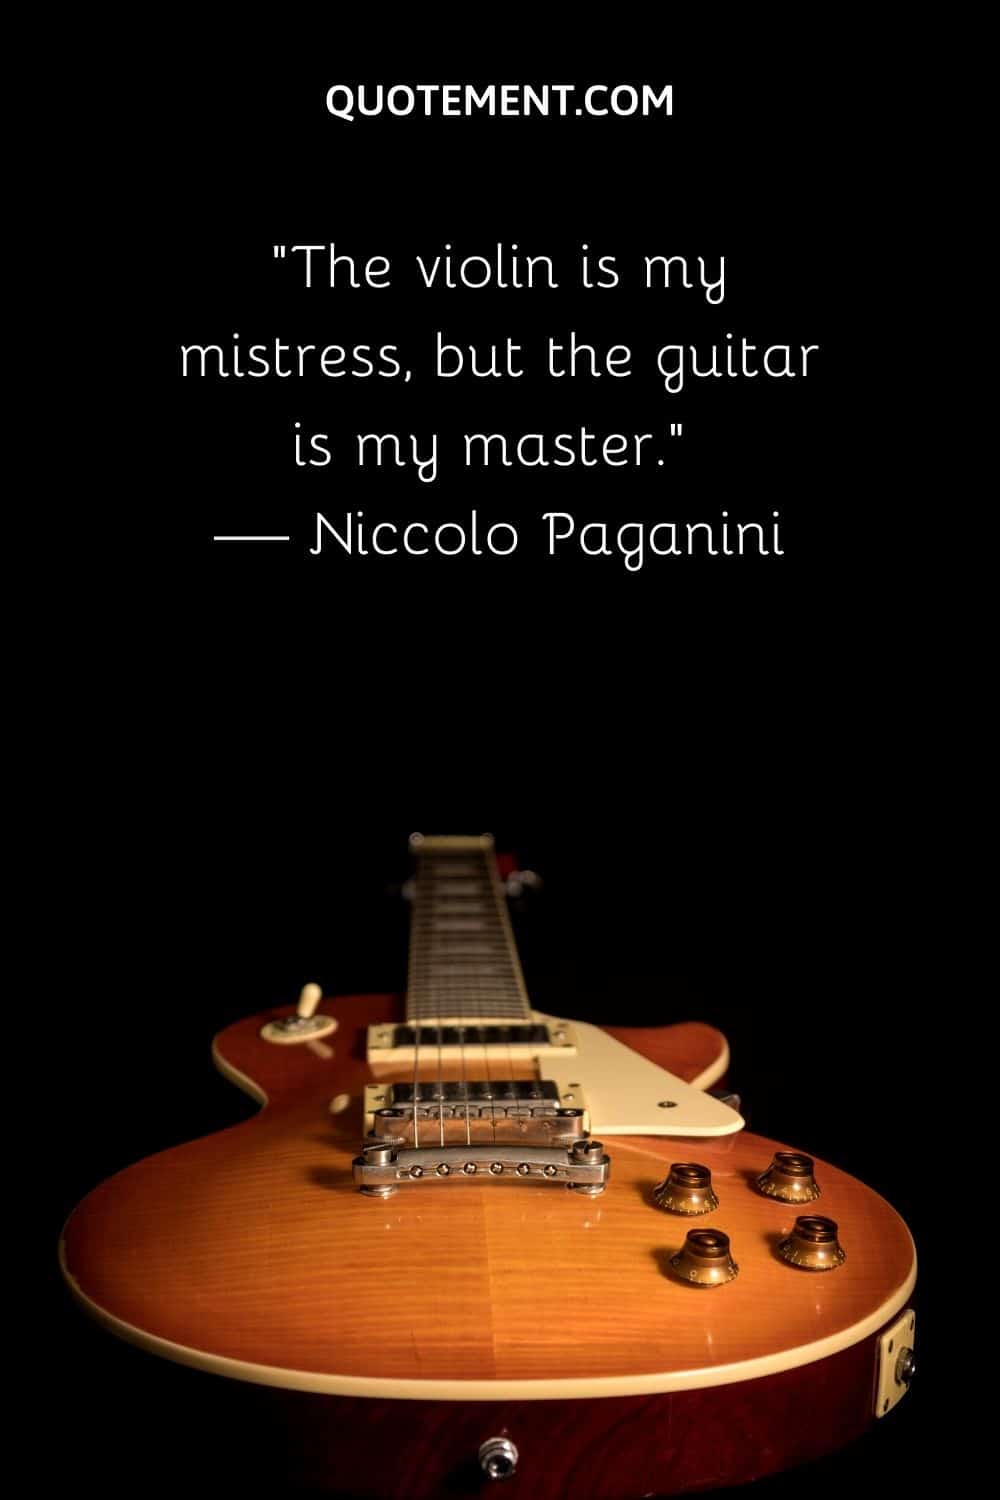 The violin is my mistress, but the guitar is my master.